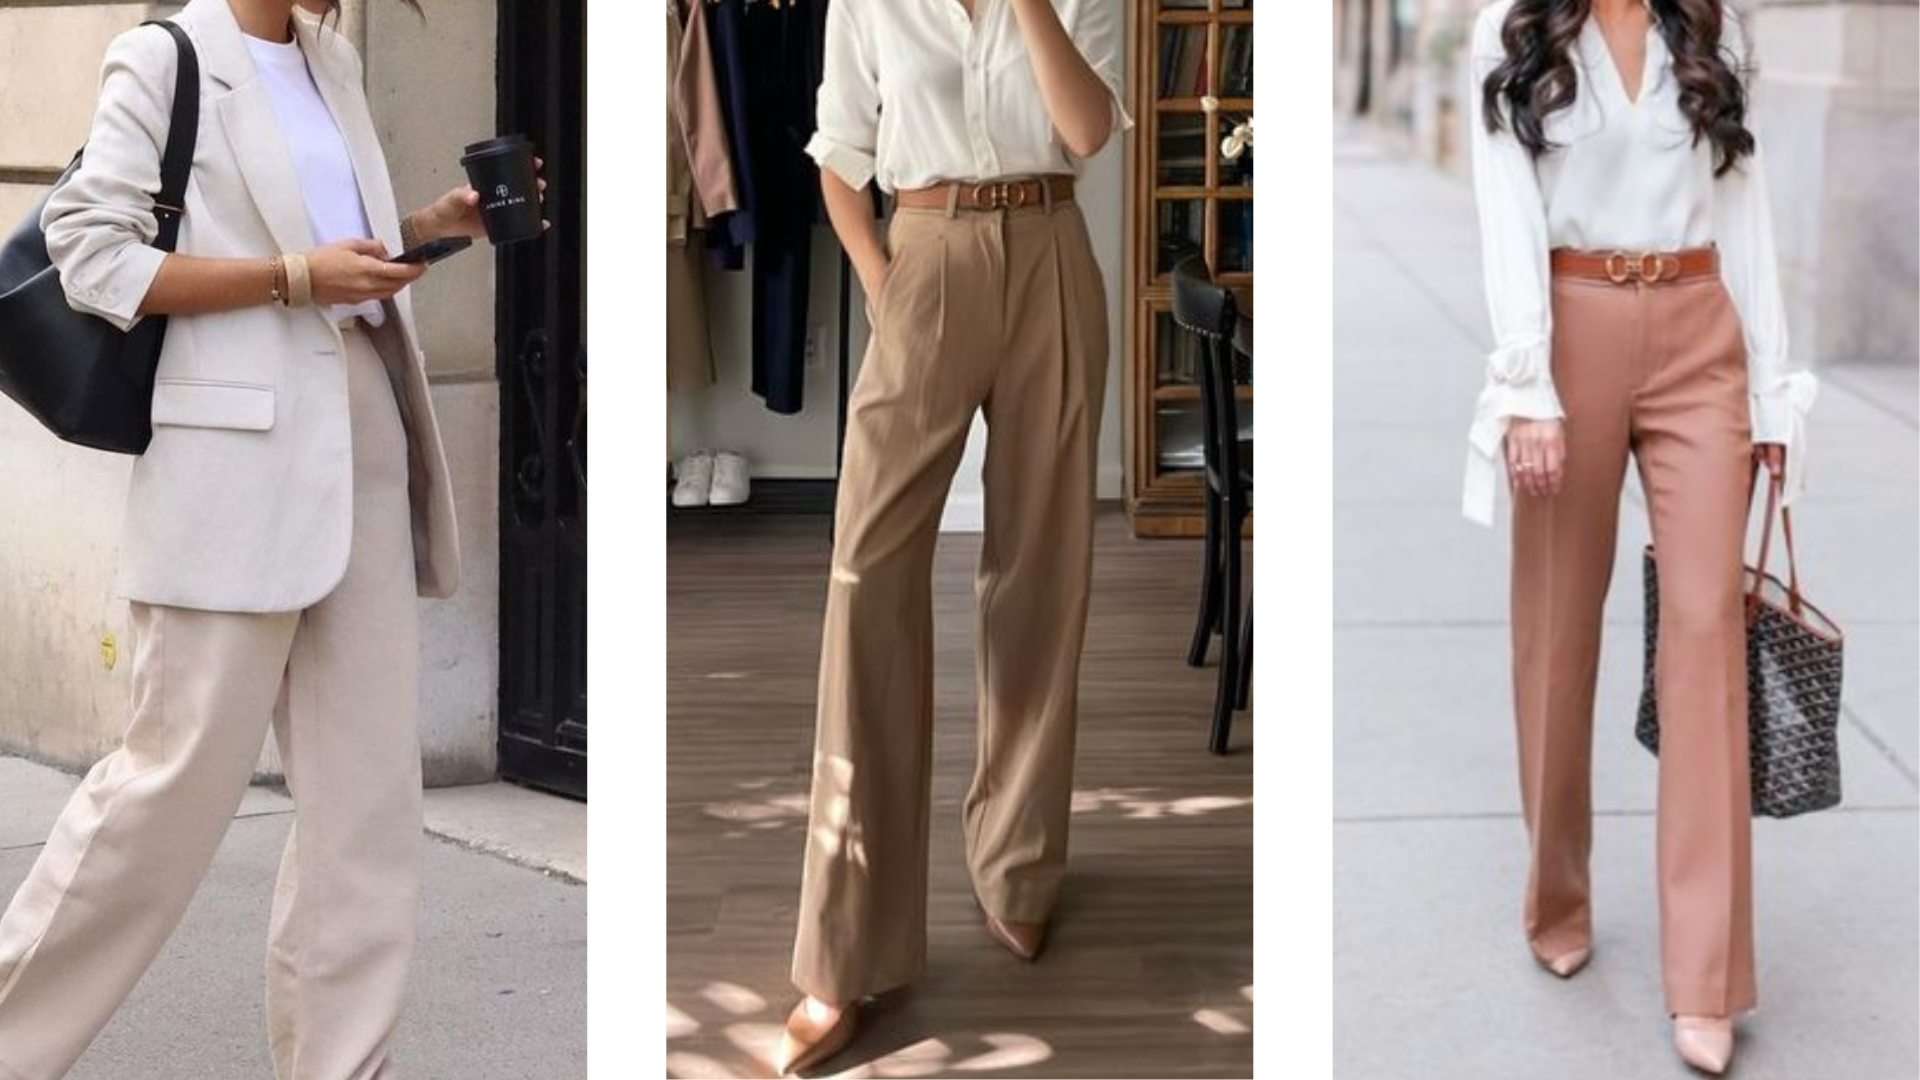 Casual Work Outfits for Women - Professional, Business-Ready Looks